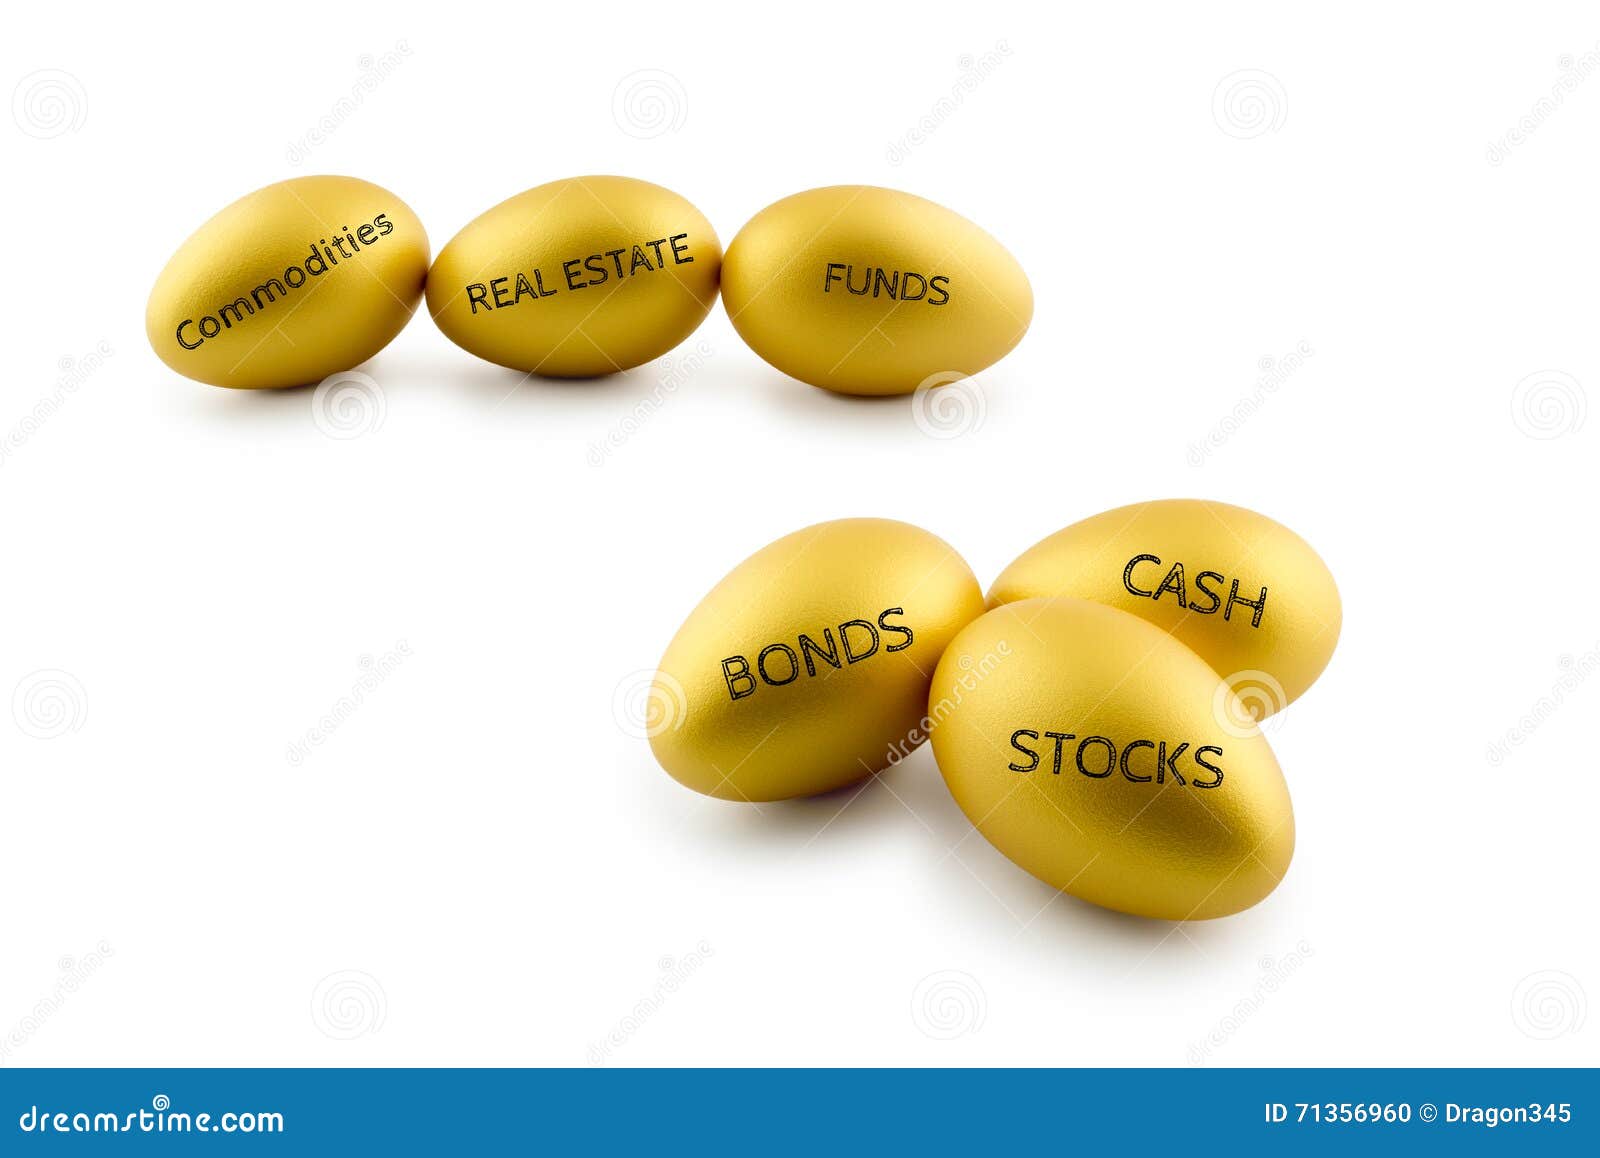 asset allocation concept, golden eggs with types of financial investment products.